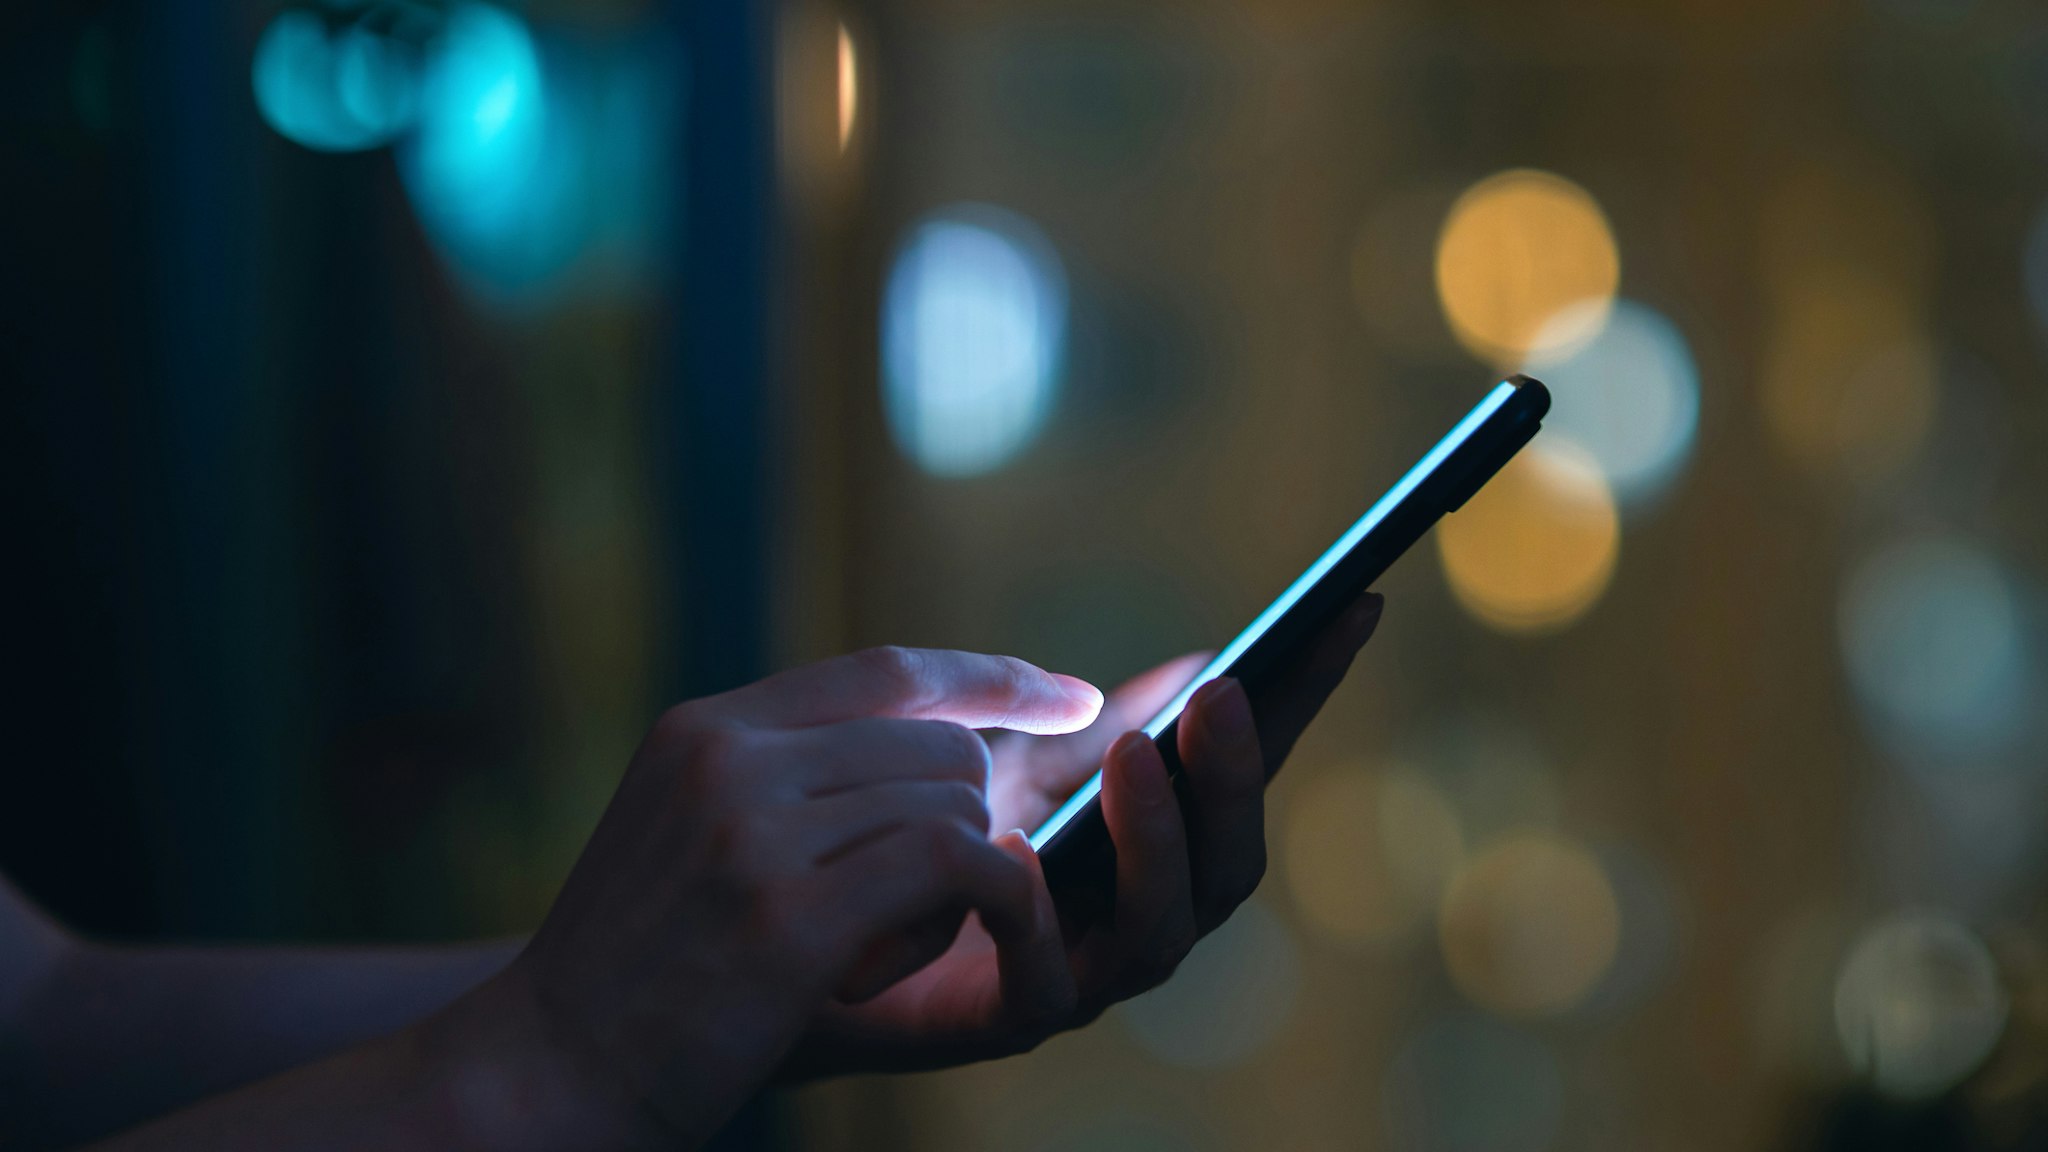 Close up of woman's hand using smartphone in the dark, against illuminated city light bokeh.